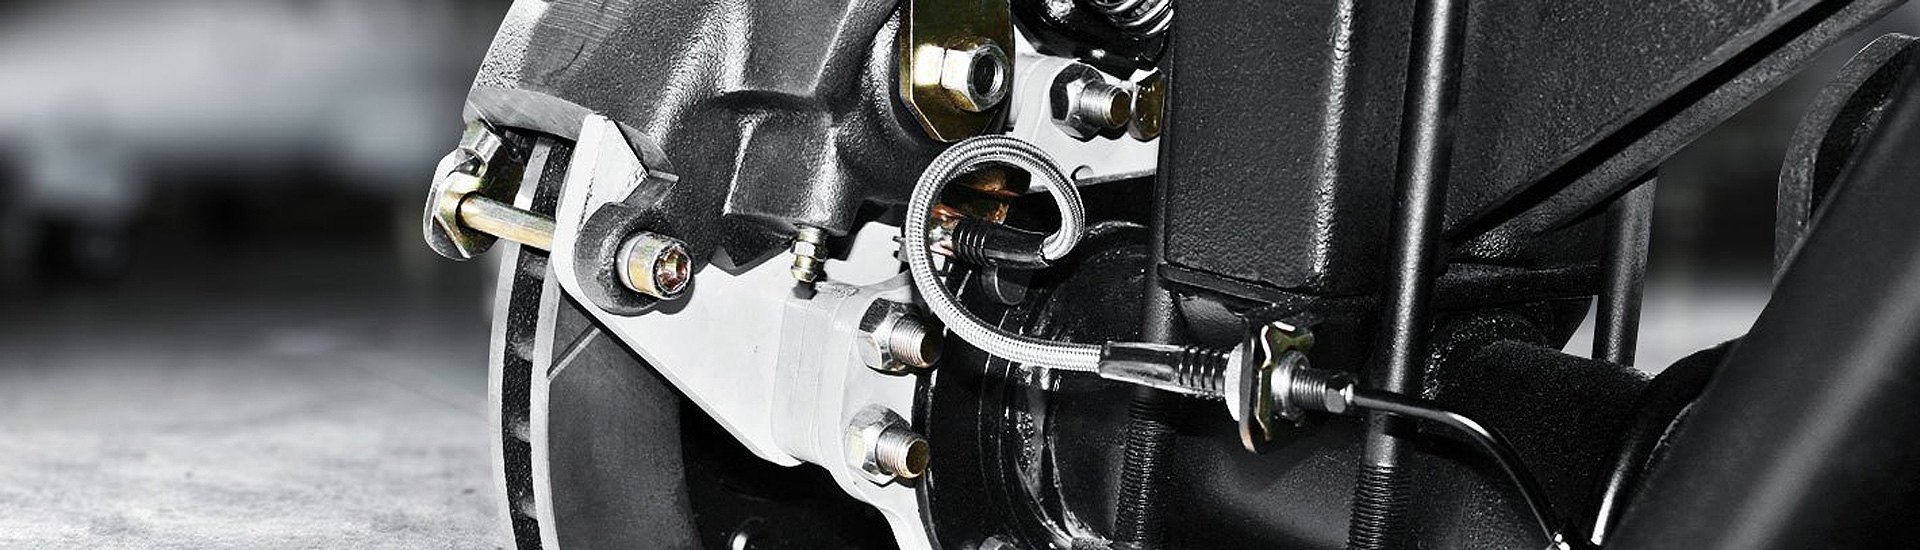 Convert Old-School Drum Brakes With a Disc Brake Conversion Kit